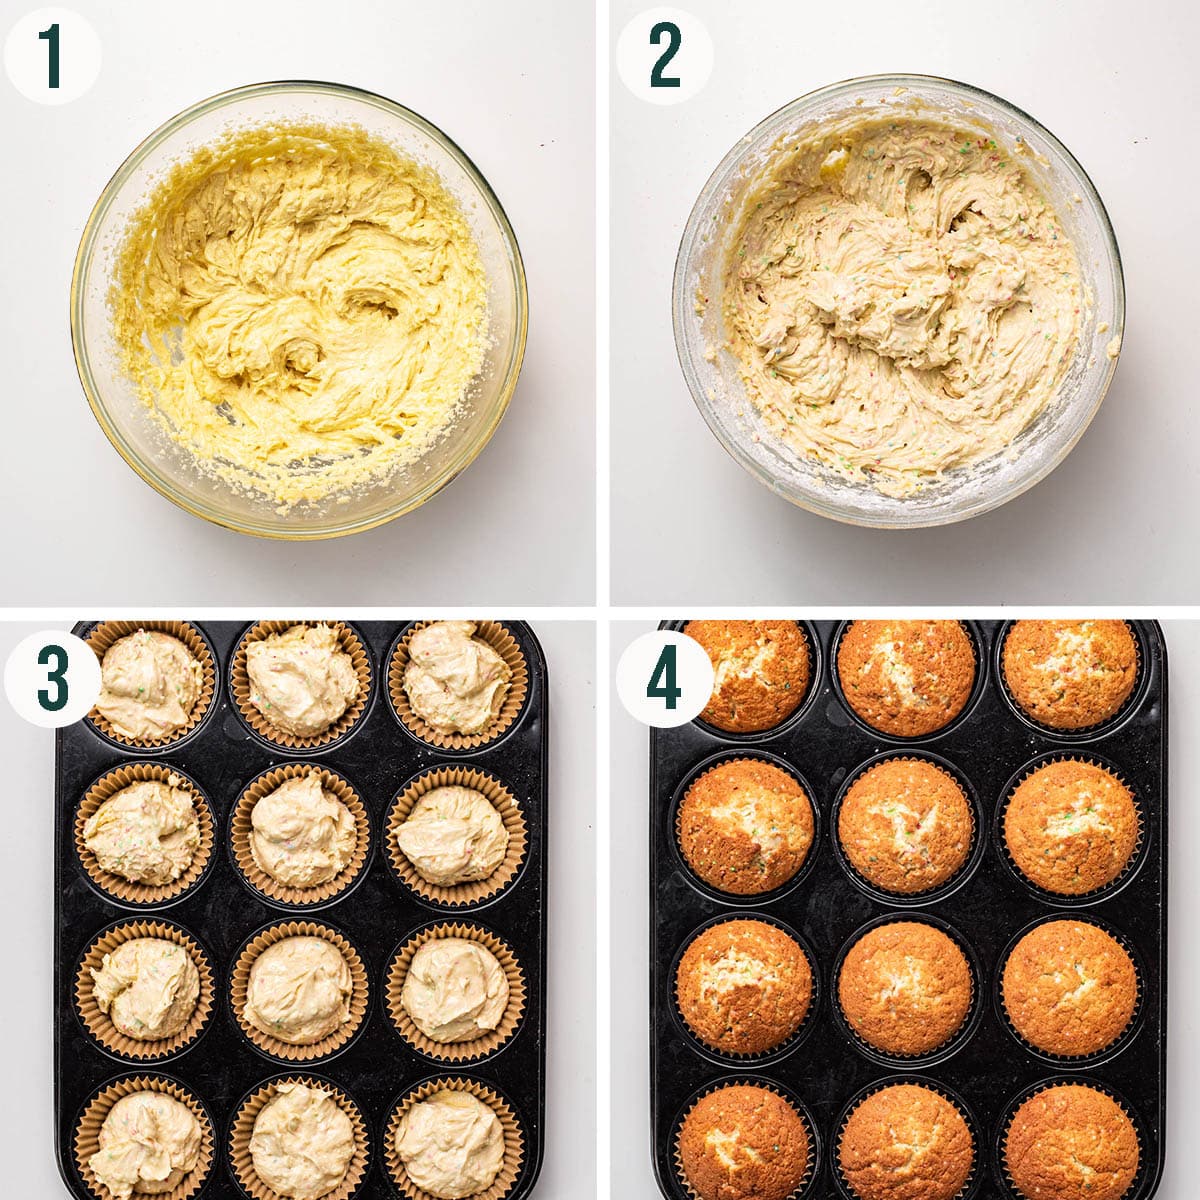 Sprinkle cupcakes steps 1 to 4, mixing batter and before and after baking.